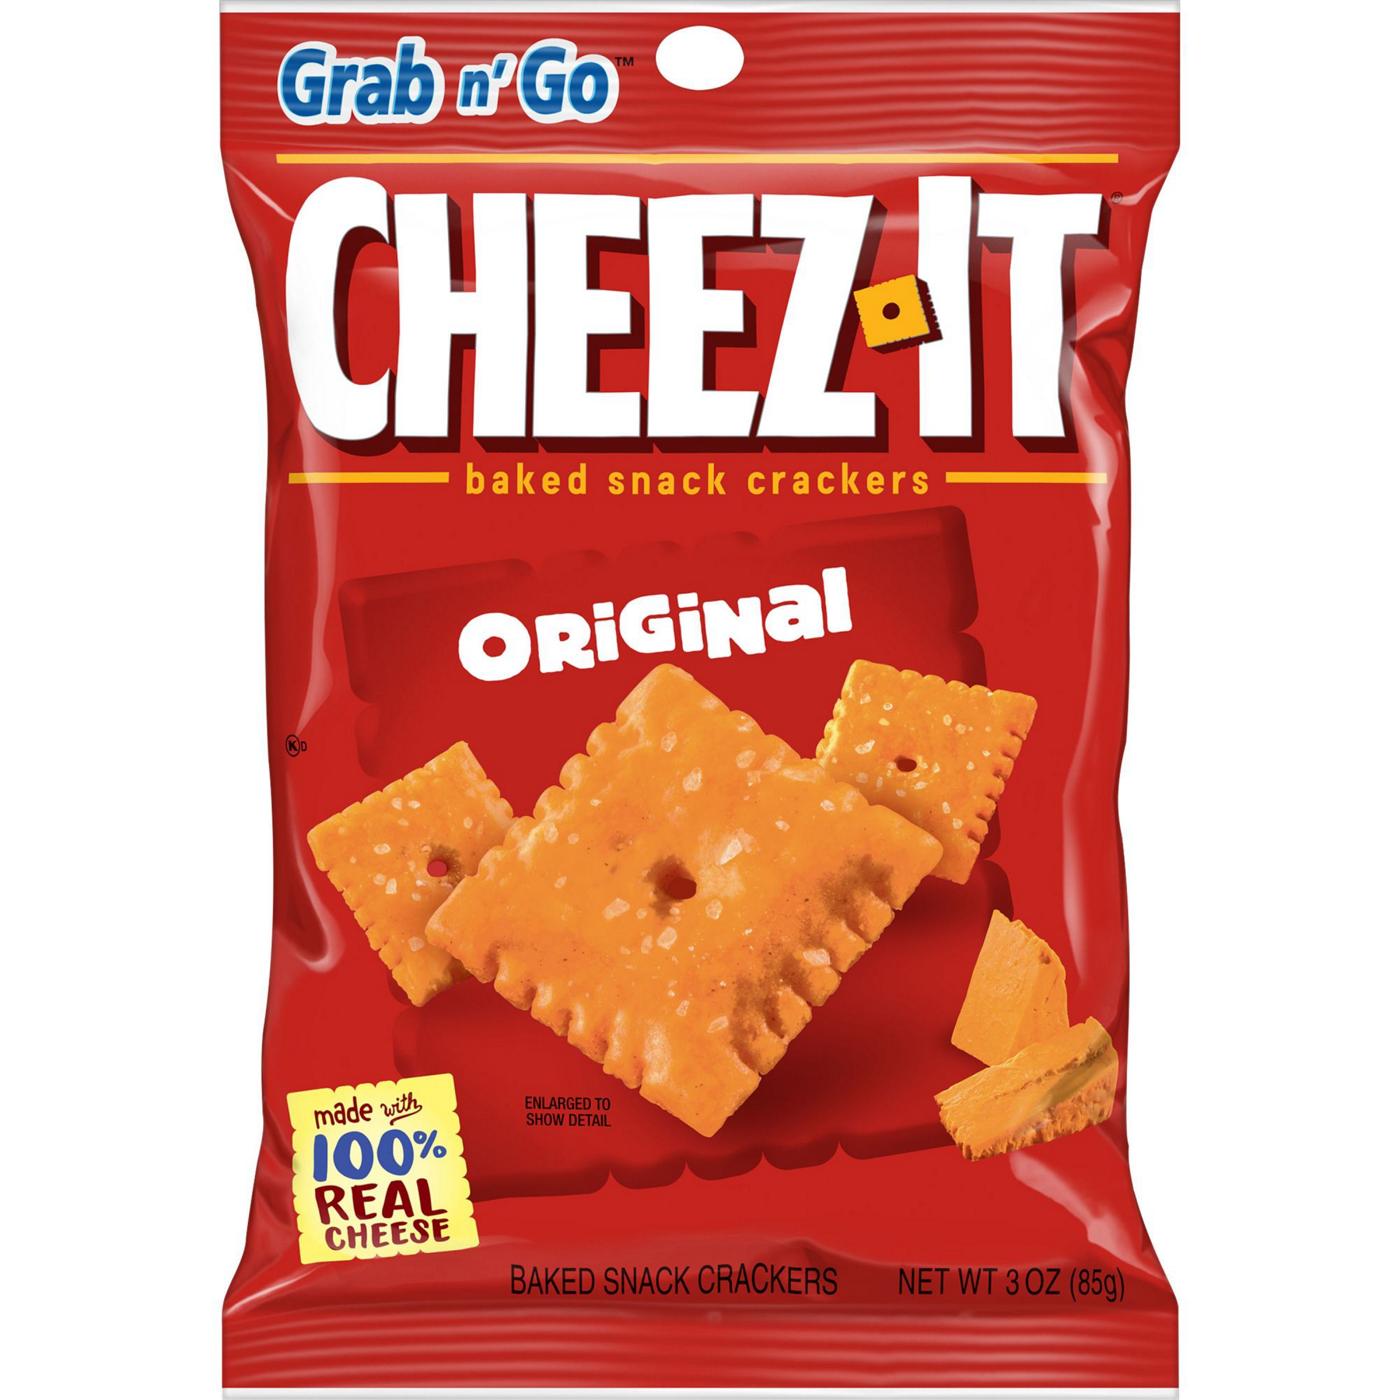 Cheez-It Original Cheese Crackers; image 1 of 5